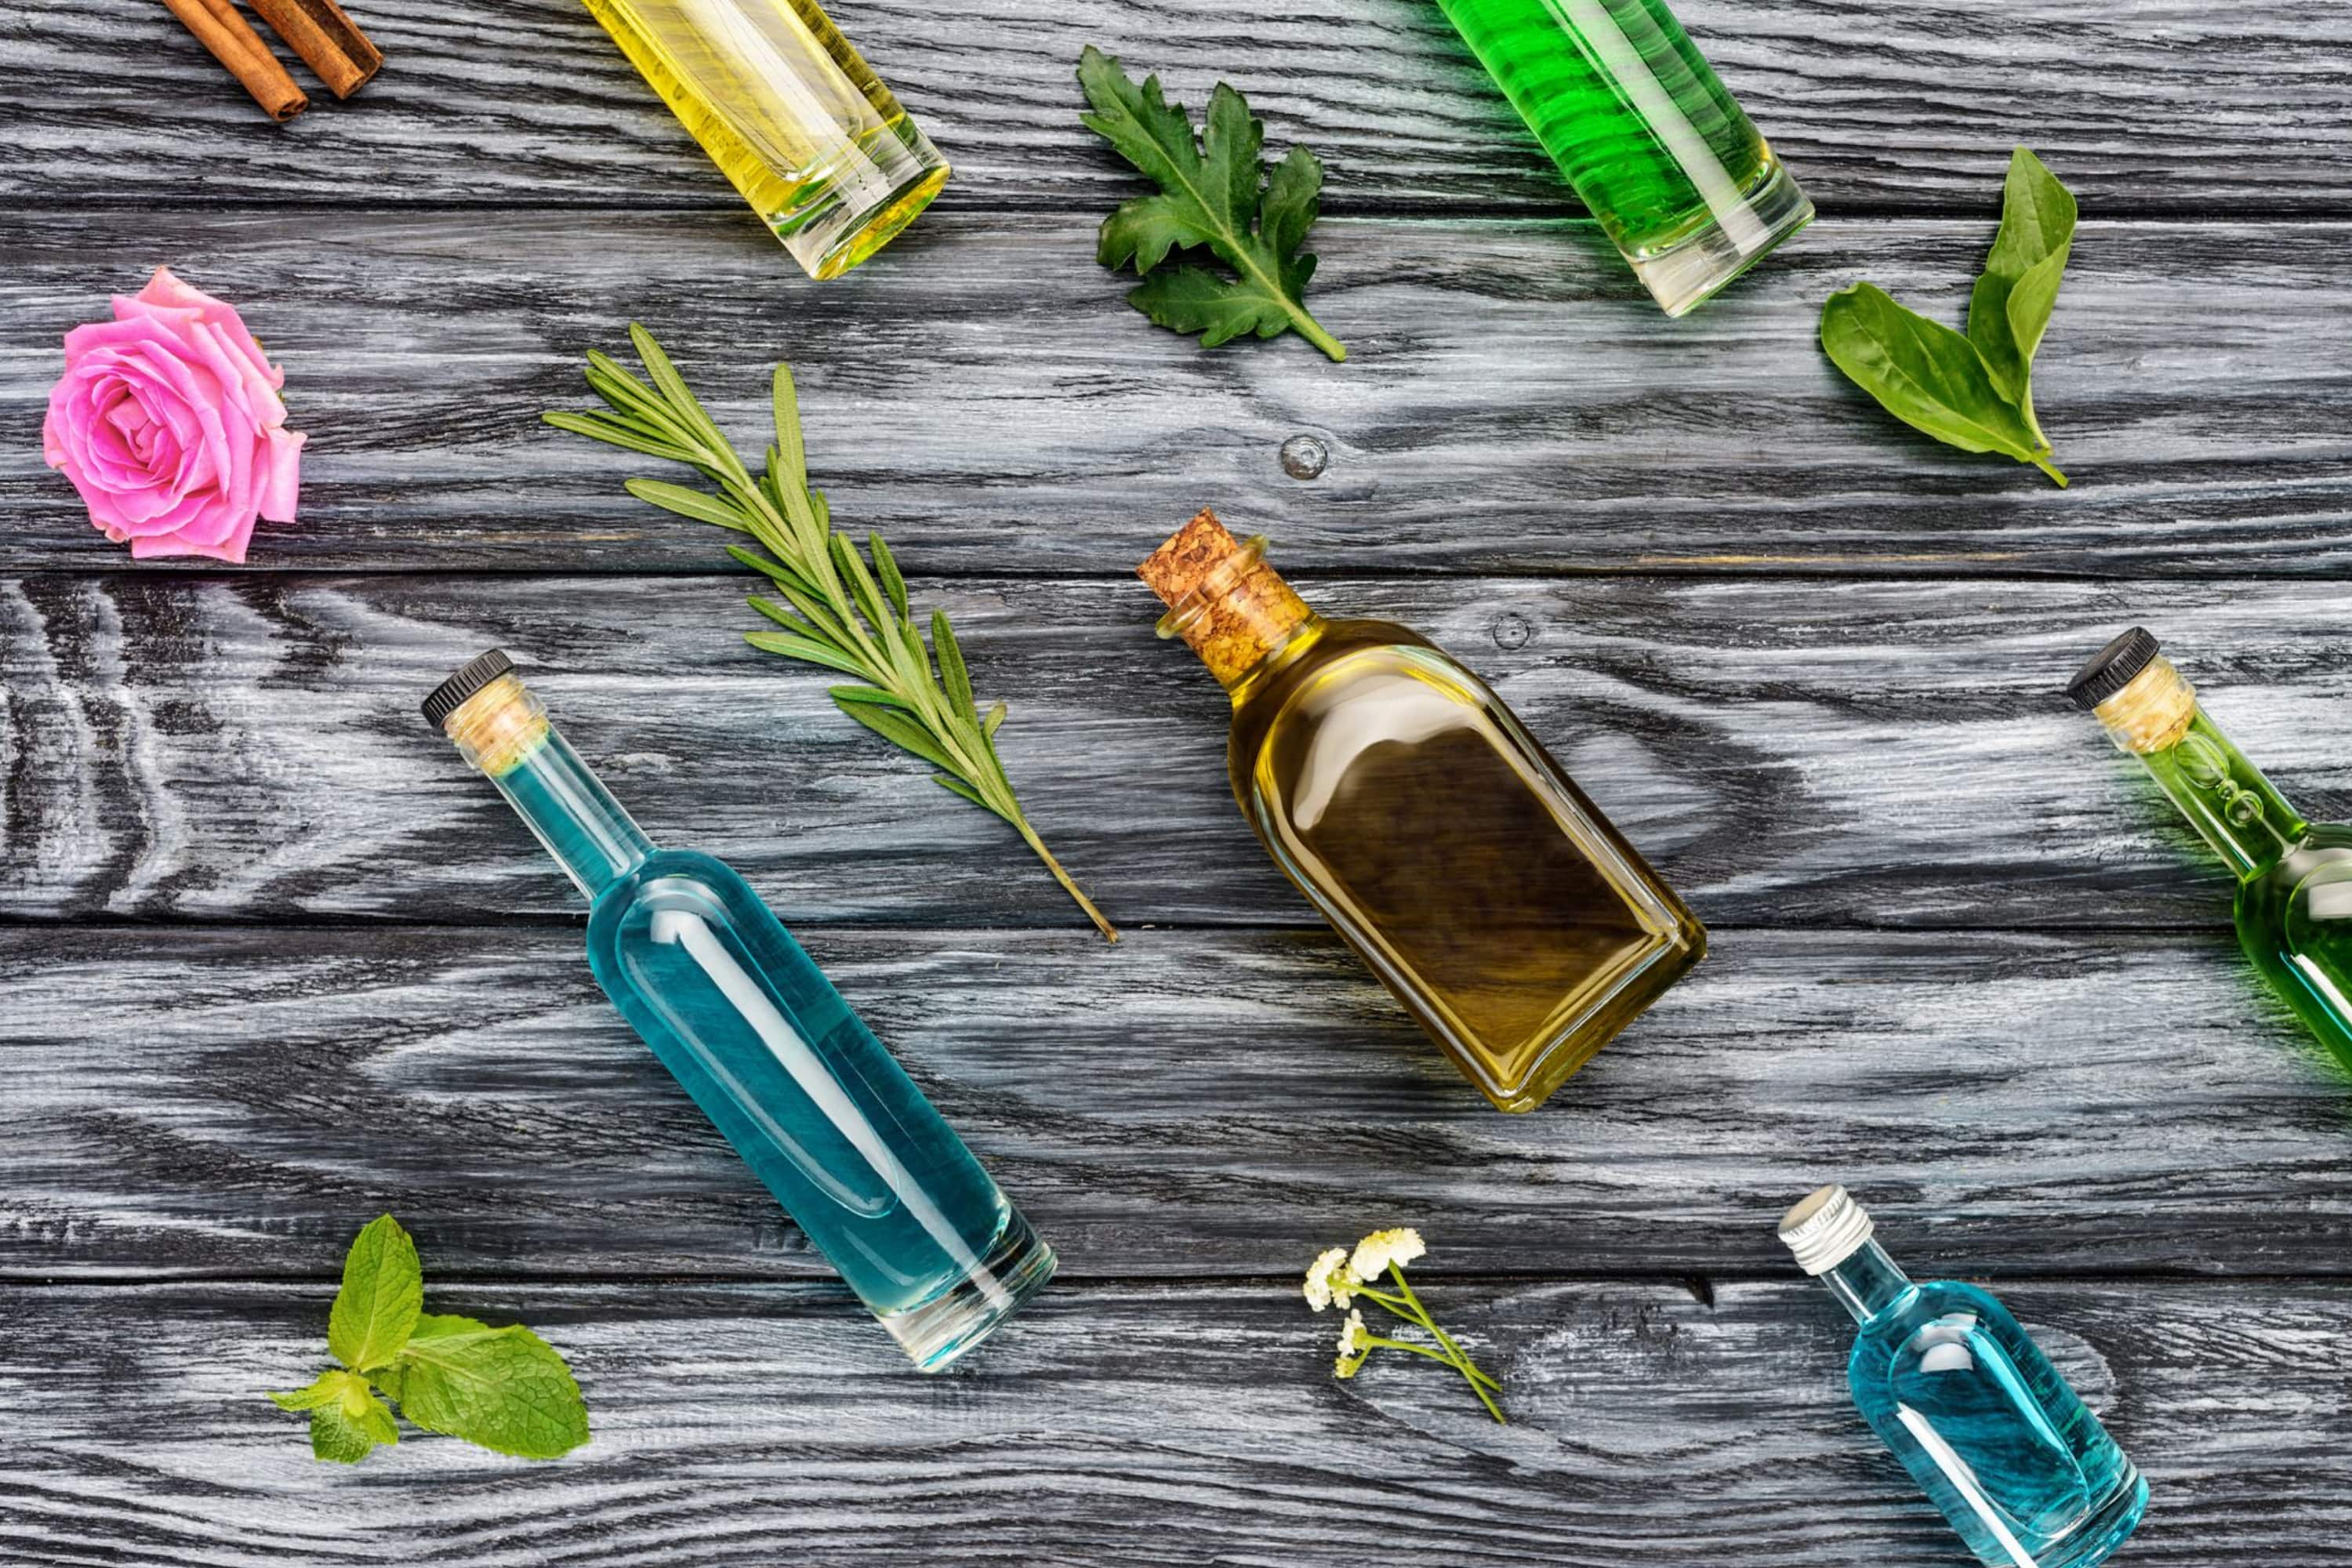 Opt For Olive Oil And Other Natural Oils